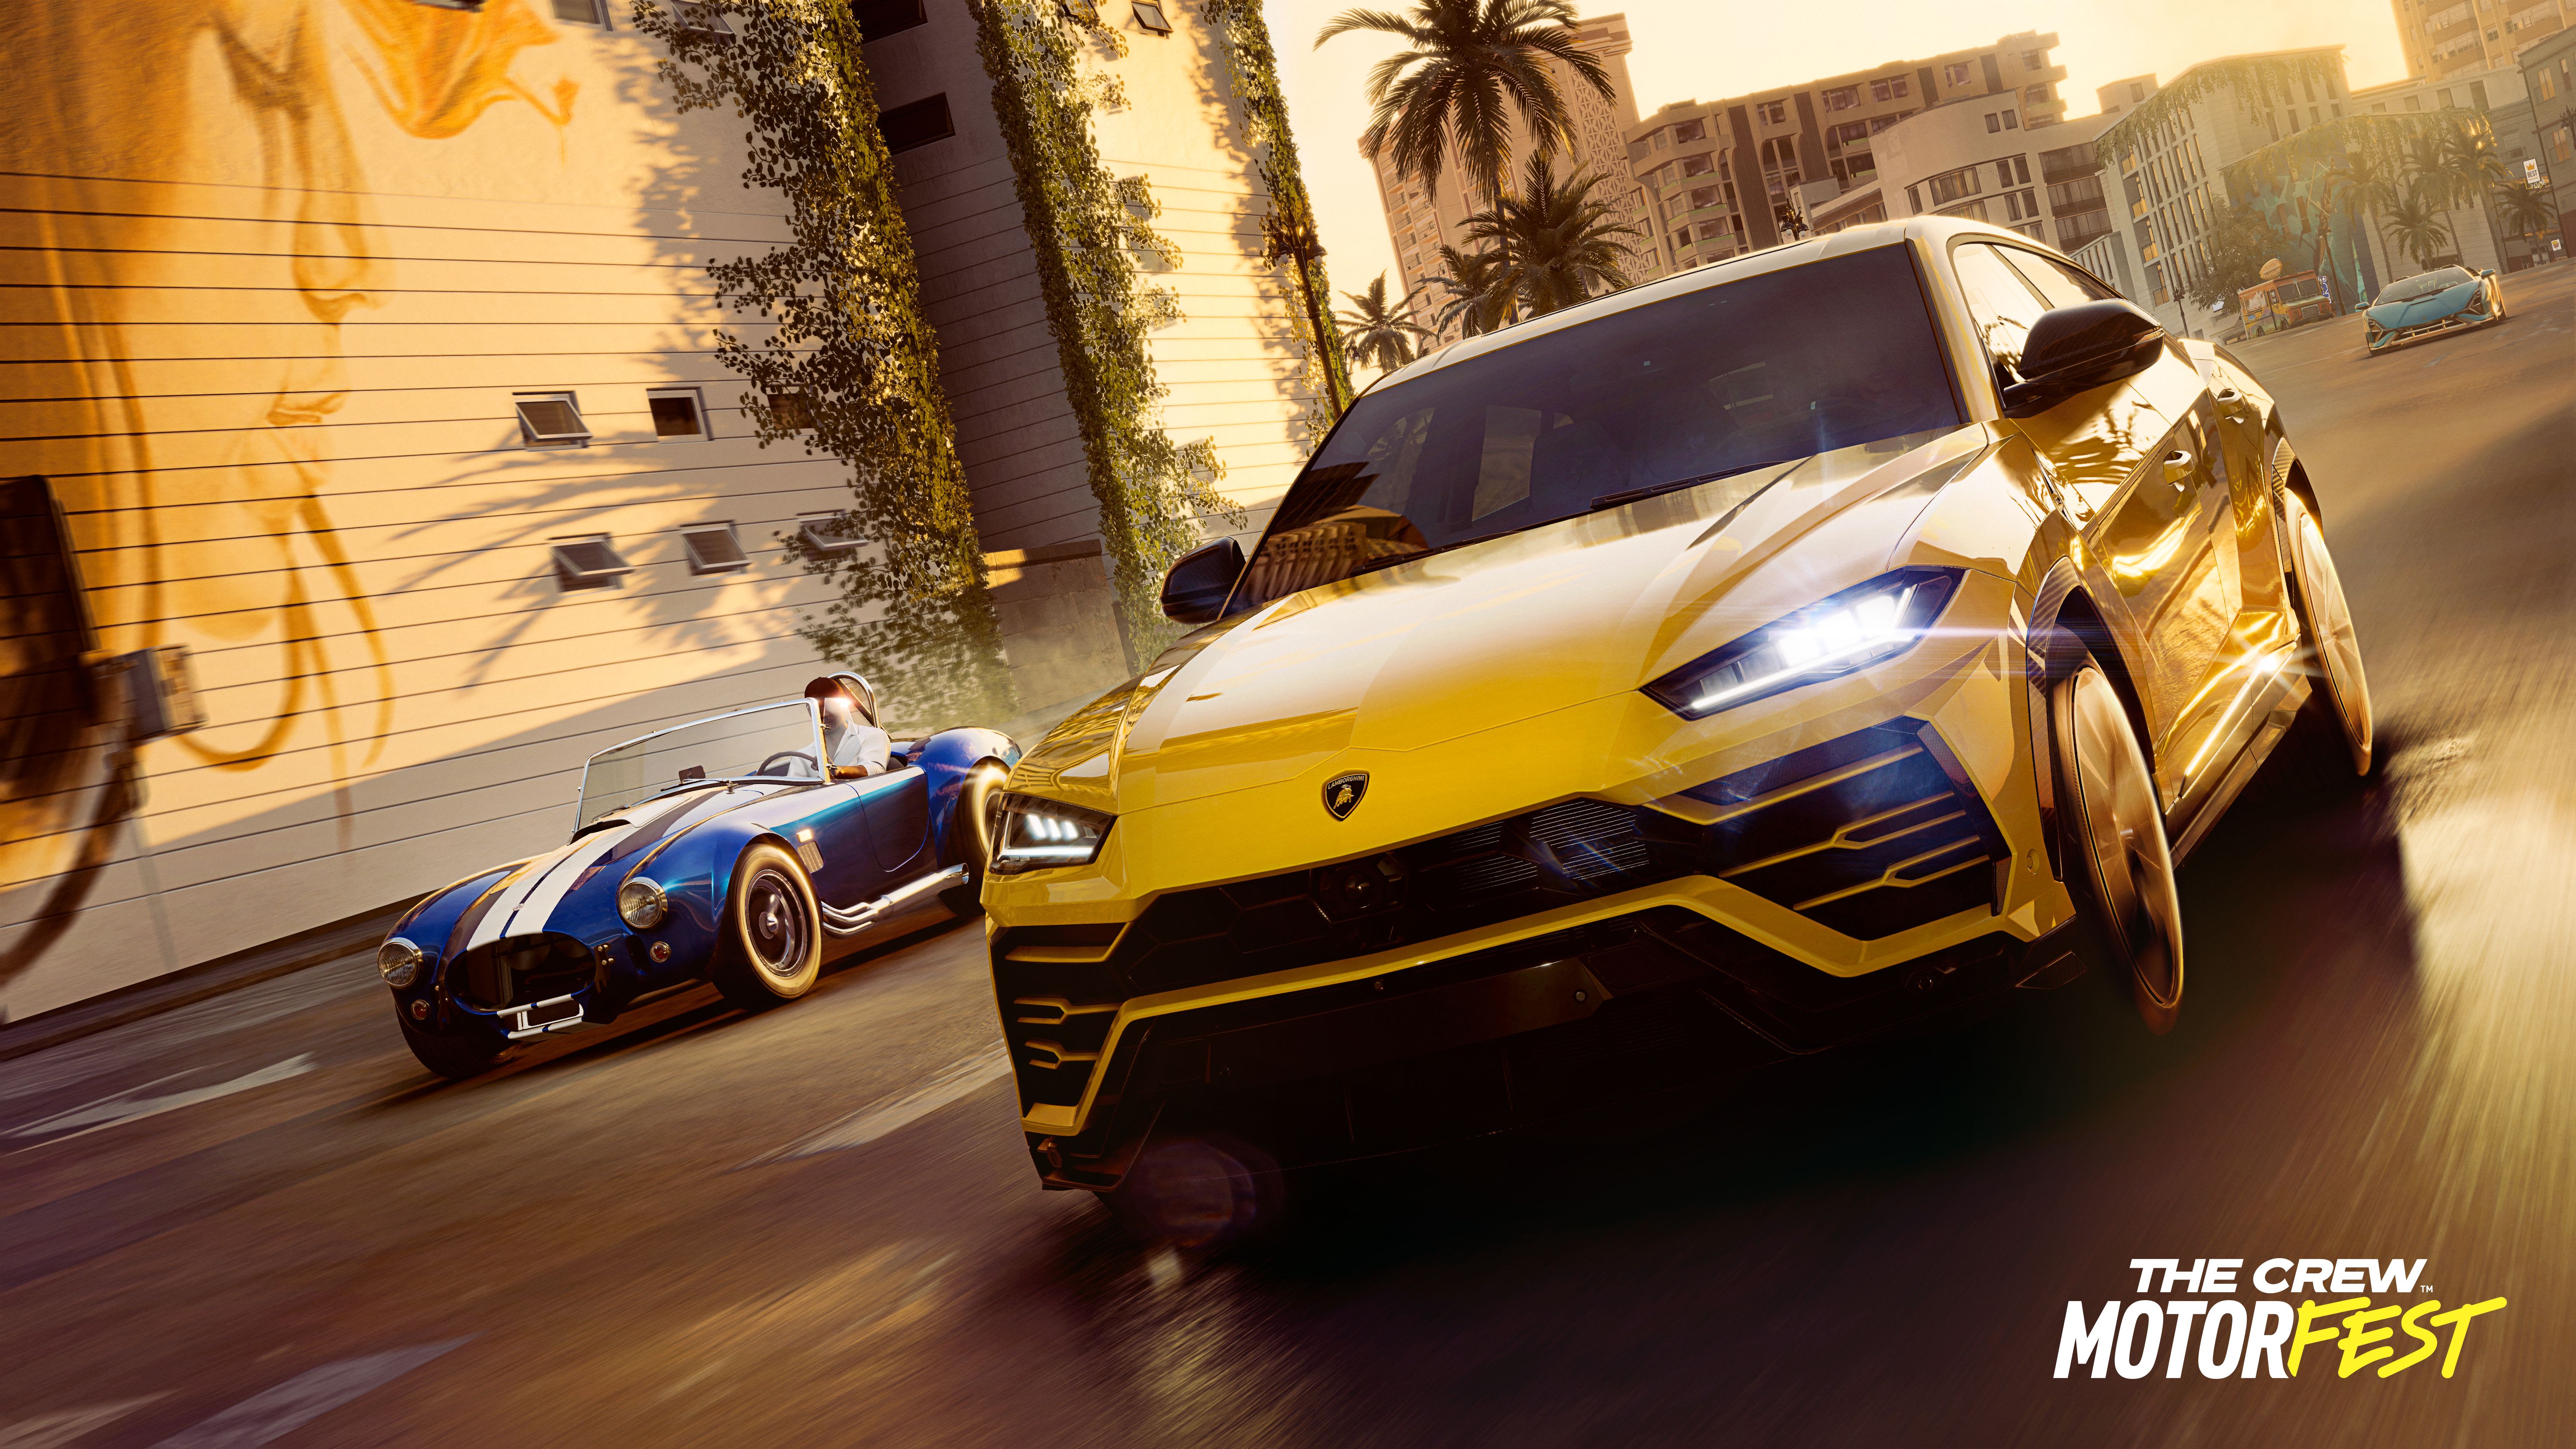 Best The Crew Motorfest settings for PS4 and PS5